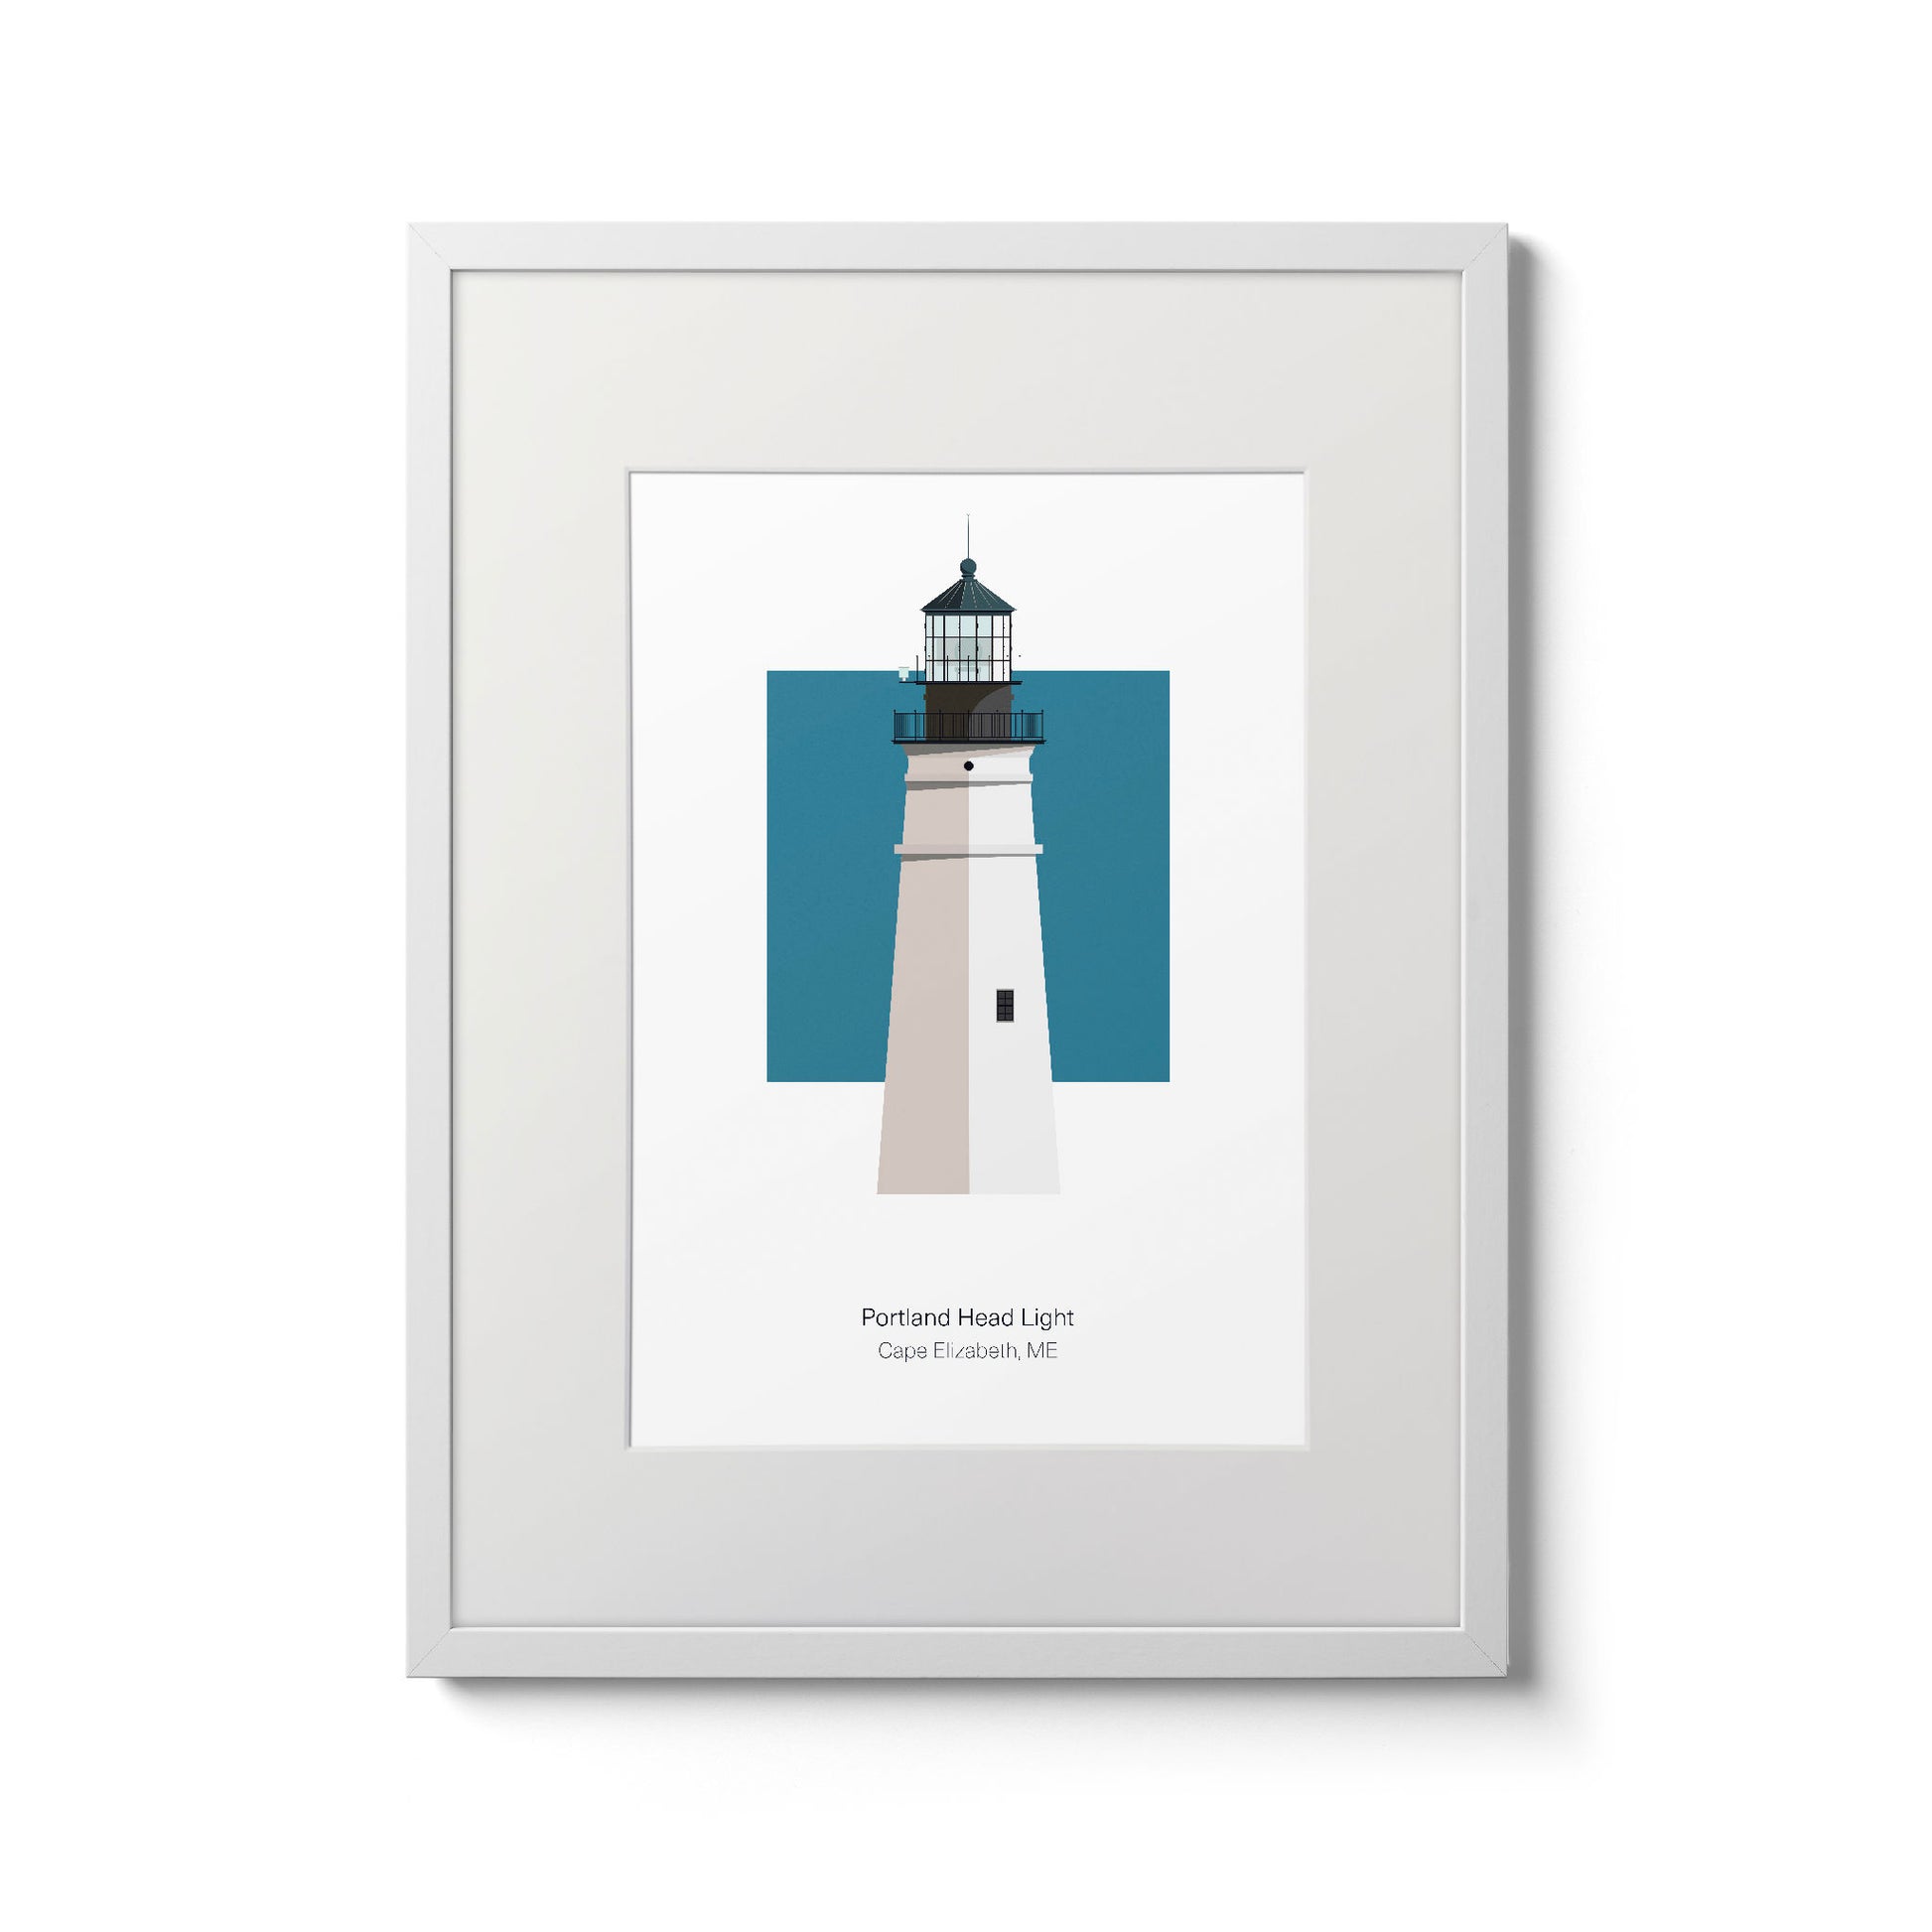 Illustration of the Portland Head lighthouse, Maine, USA. On a white background with aqua blue square as a backdrop., in a white frame  and measuring 11"x14" (30x40cm).